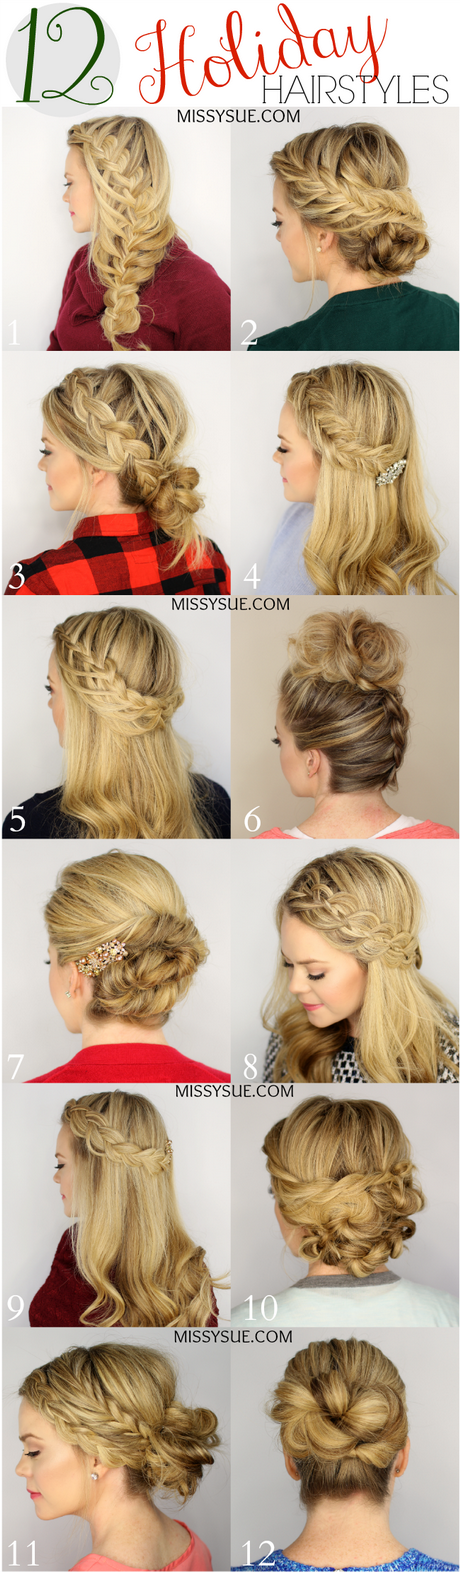 Holiday hairstyles holiday-hairstyles-17